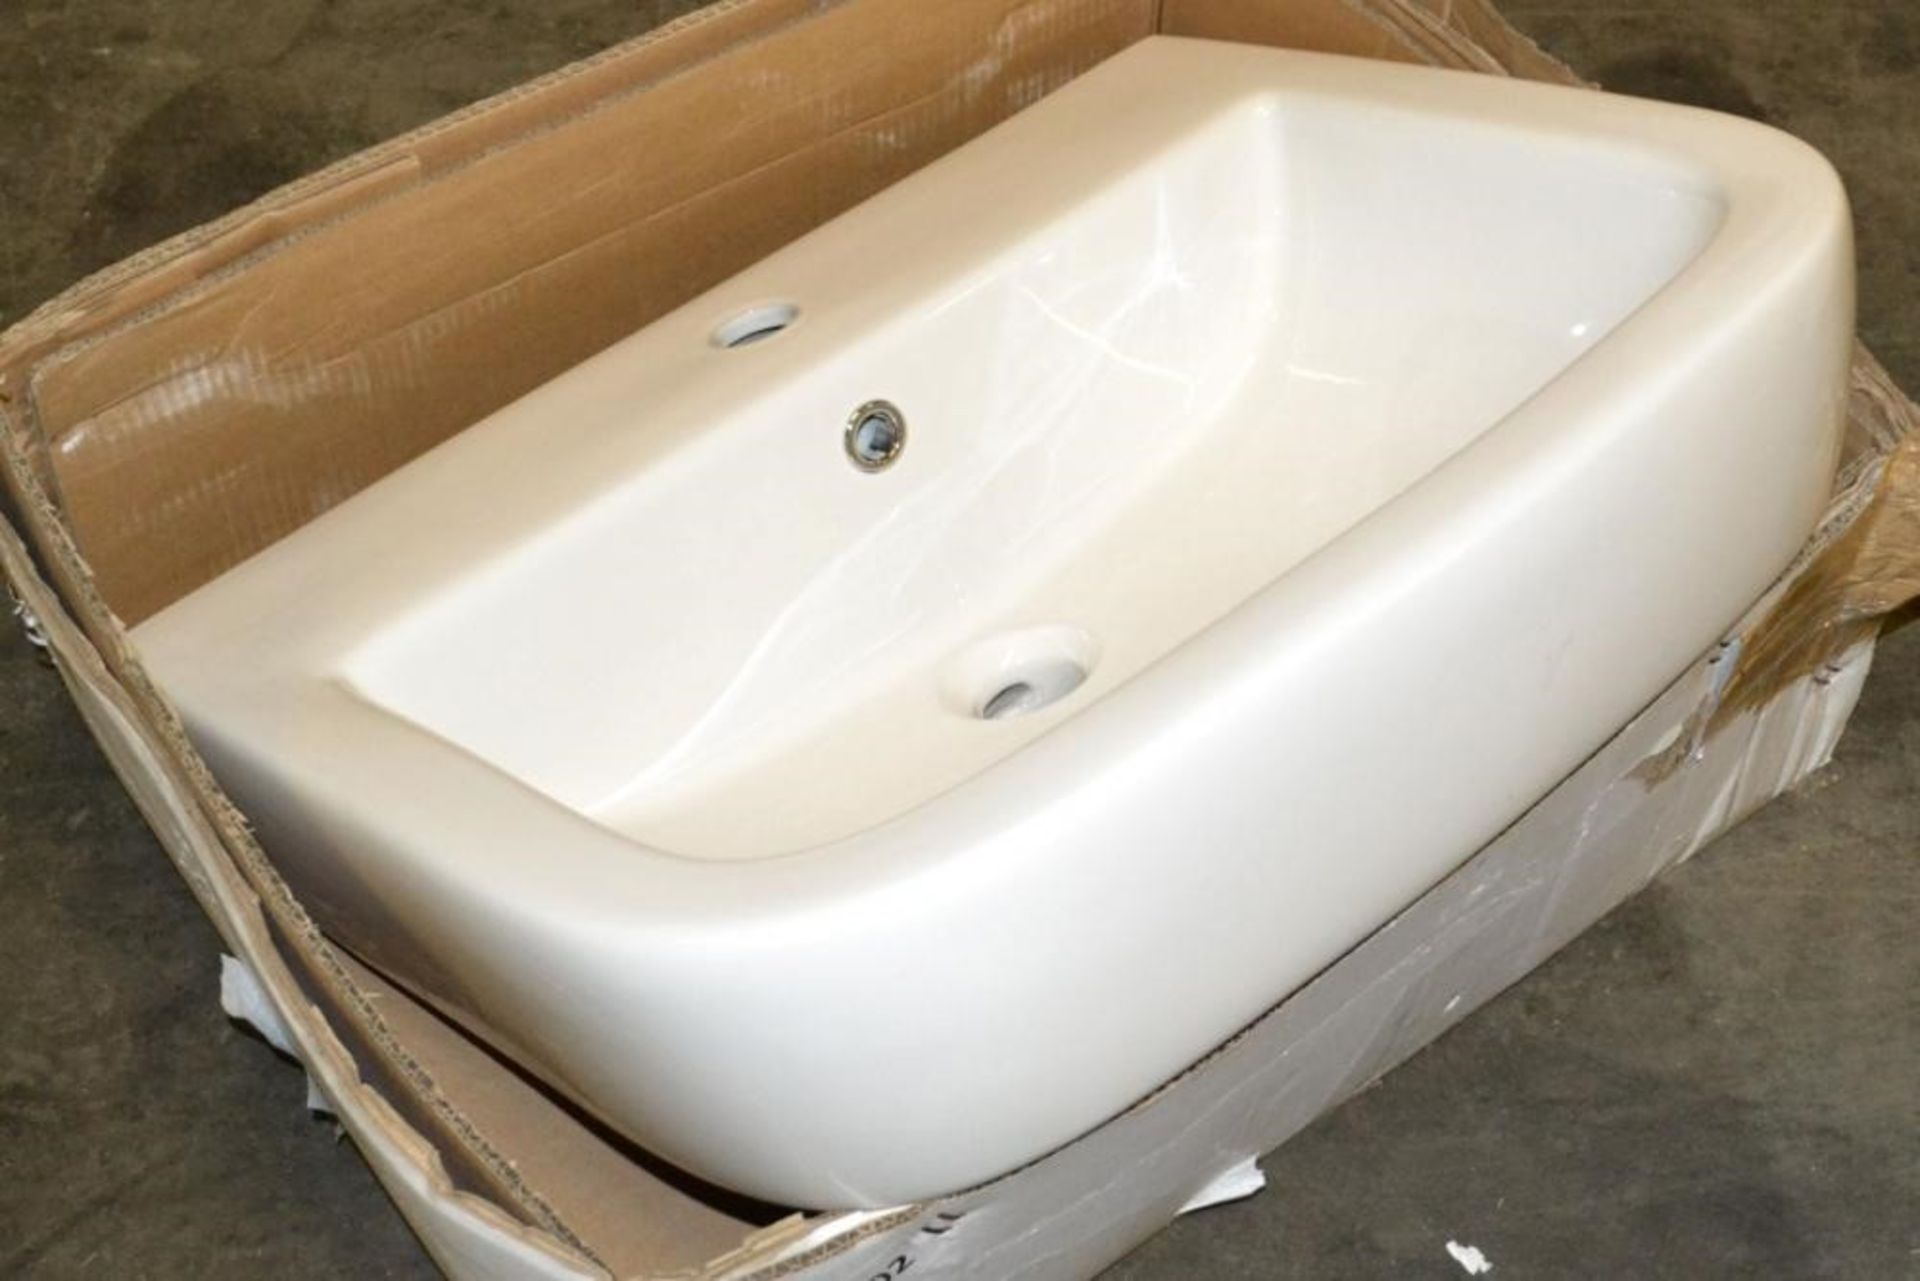 1 x Essence 560mm Basin With One Tap Hole (No Pedestal) - Ref: DY110/L10100 - CL190 - Unused Stock - - Image 3 of 4